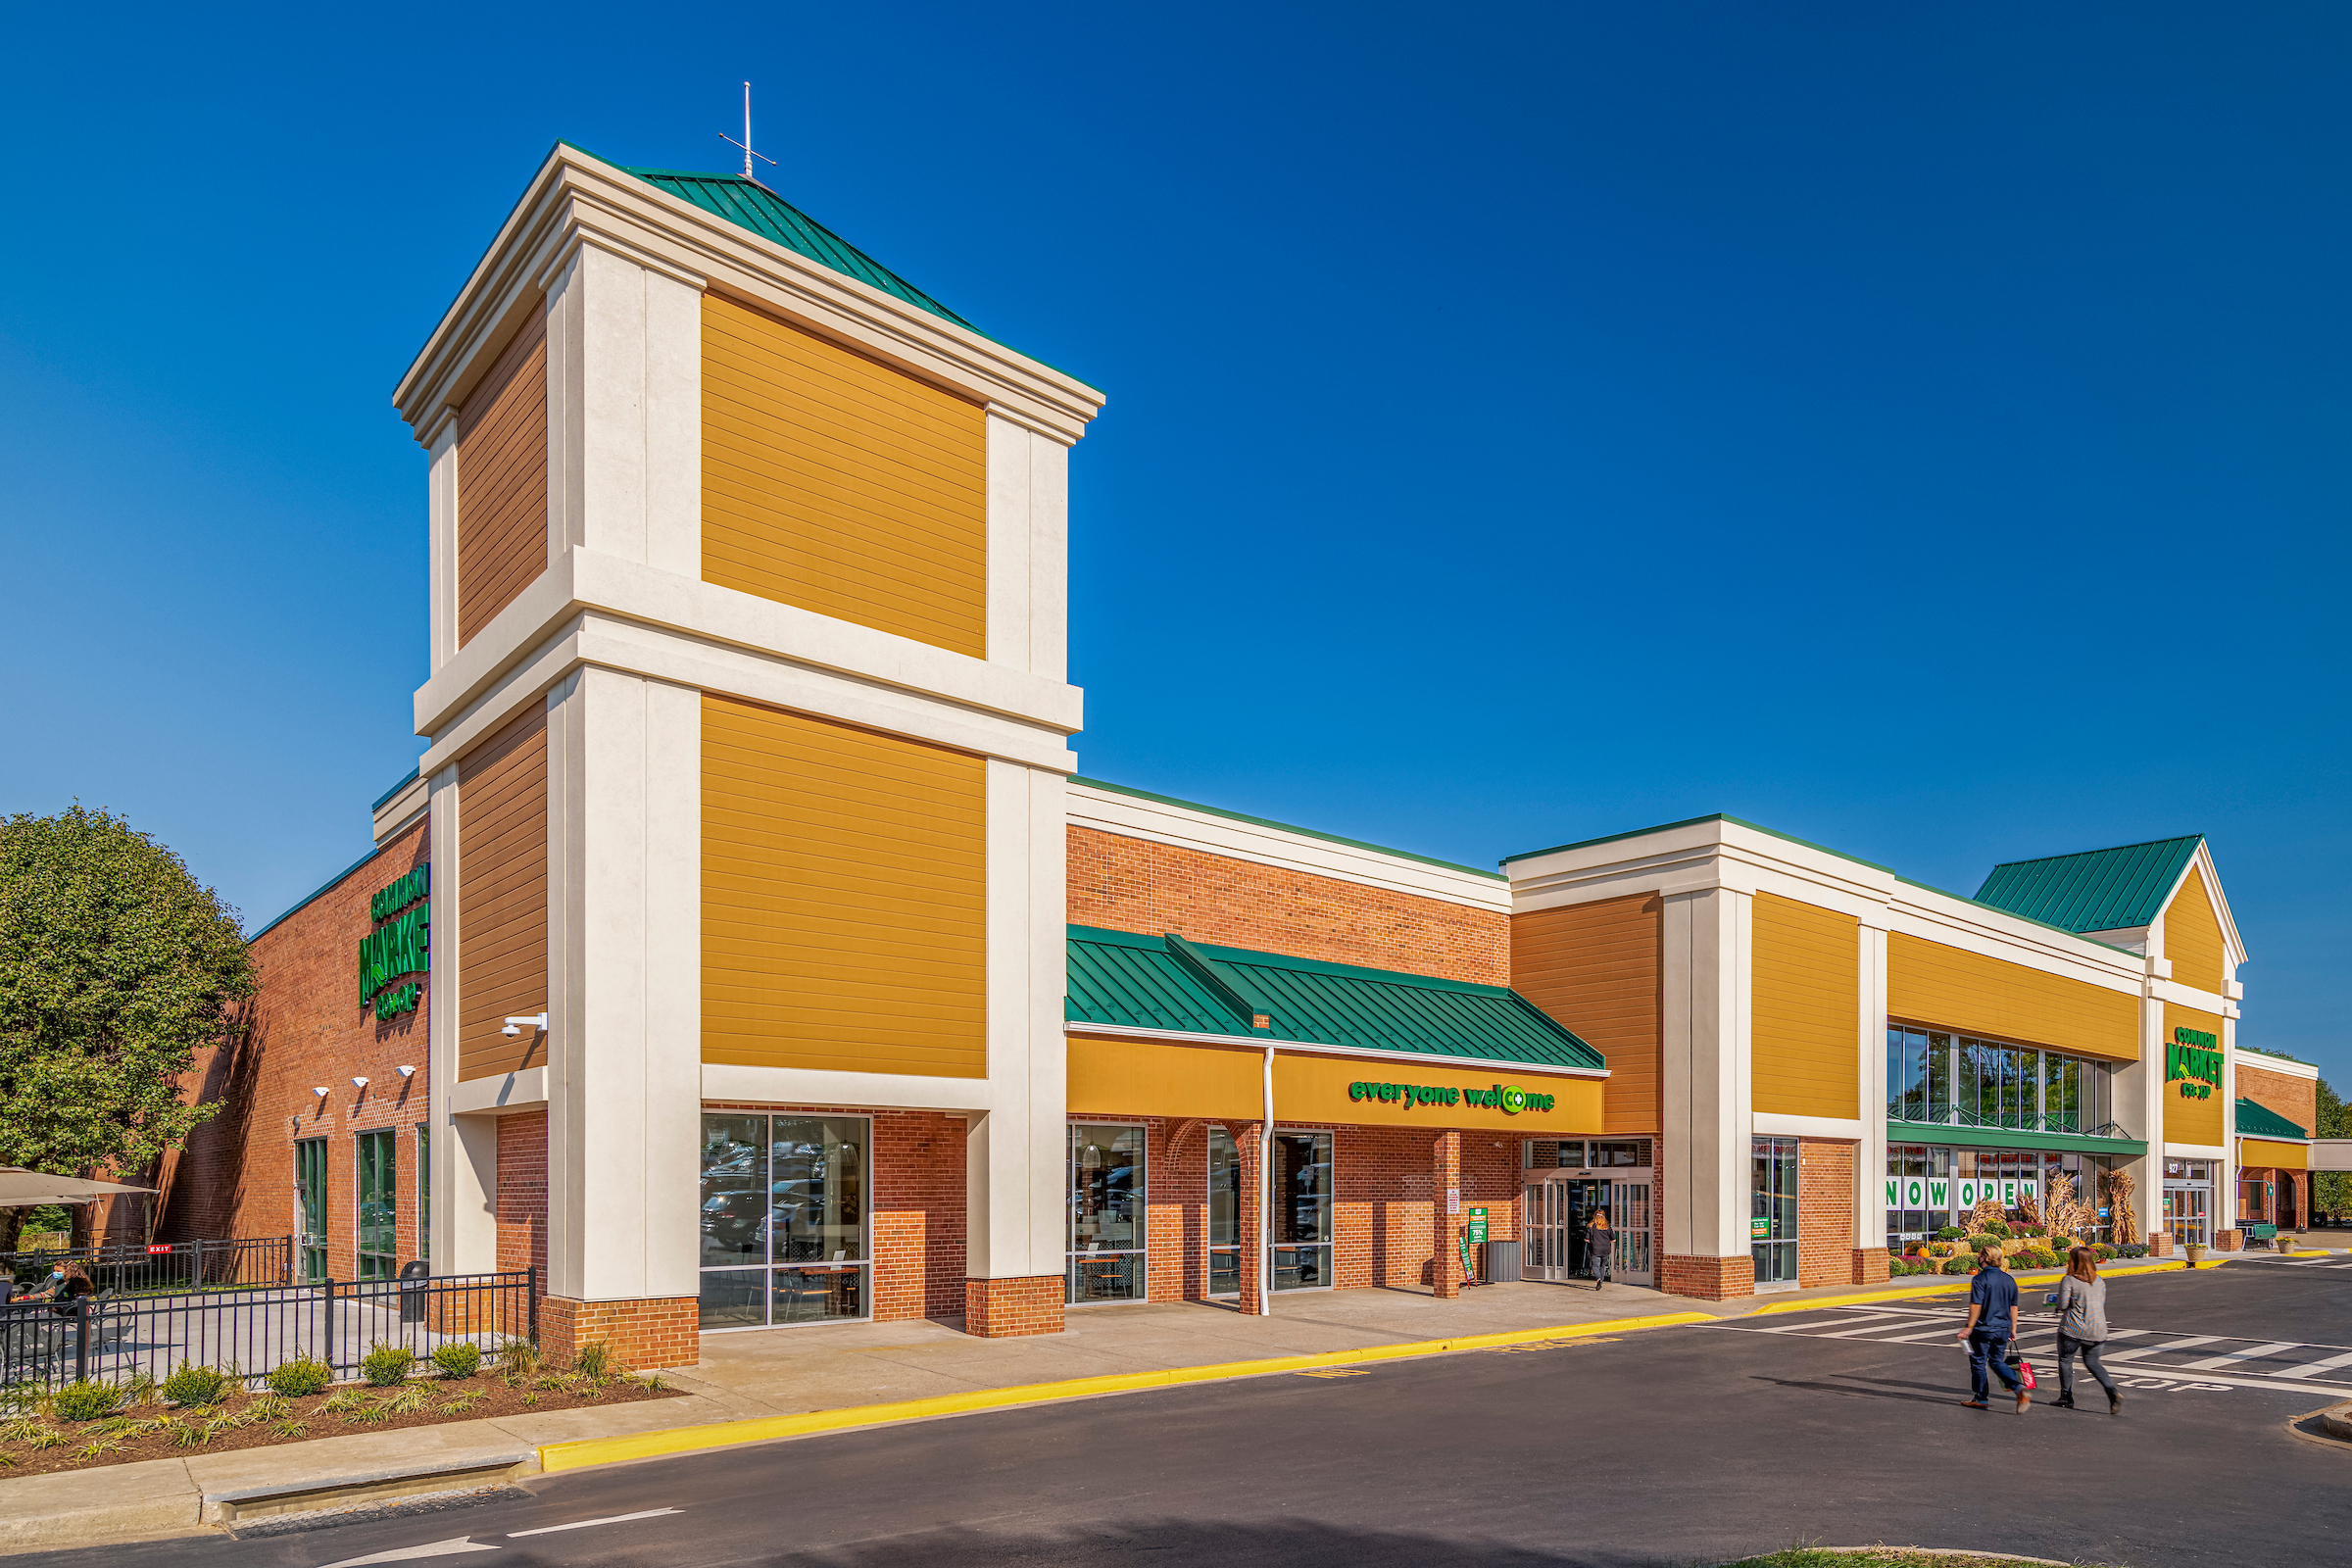 Exterior image of The Common Market in Frederick MD